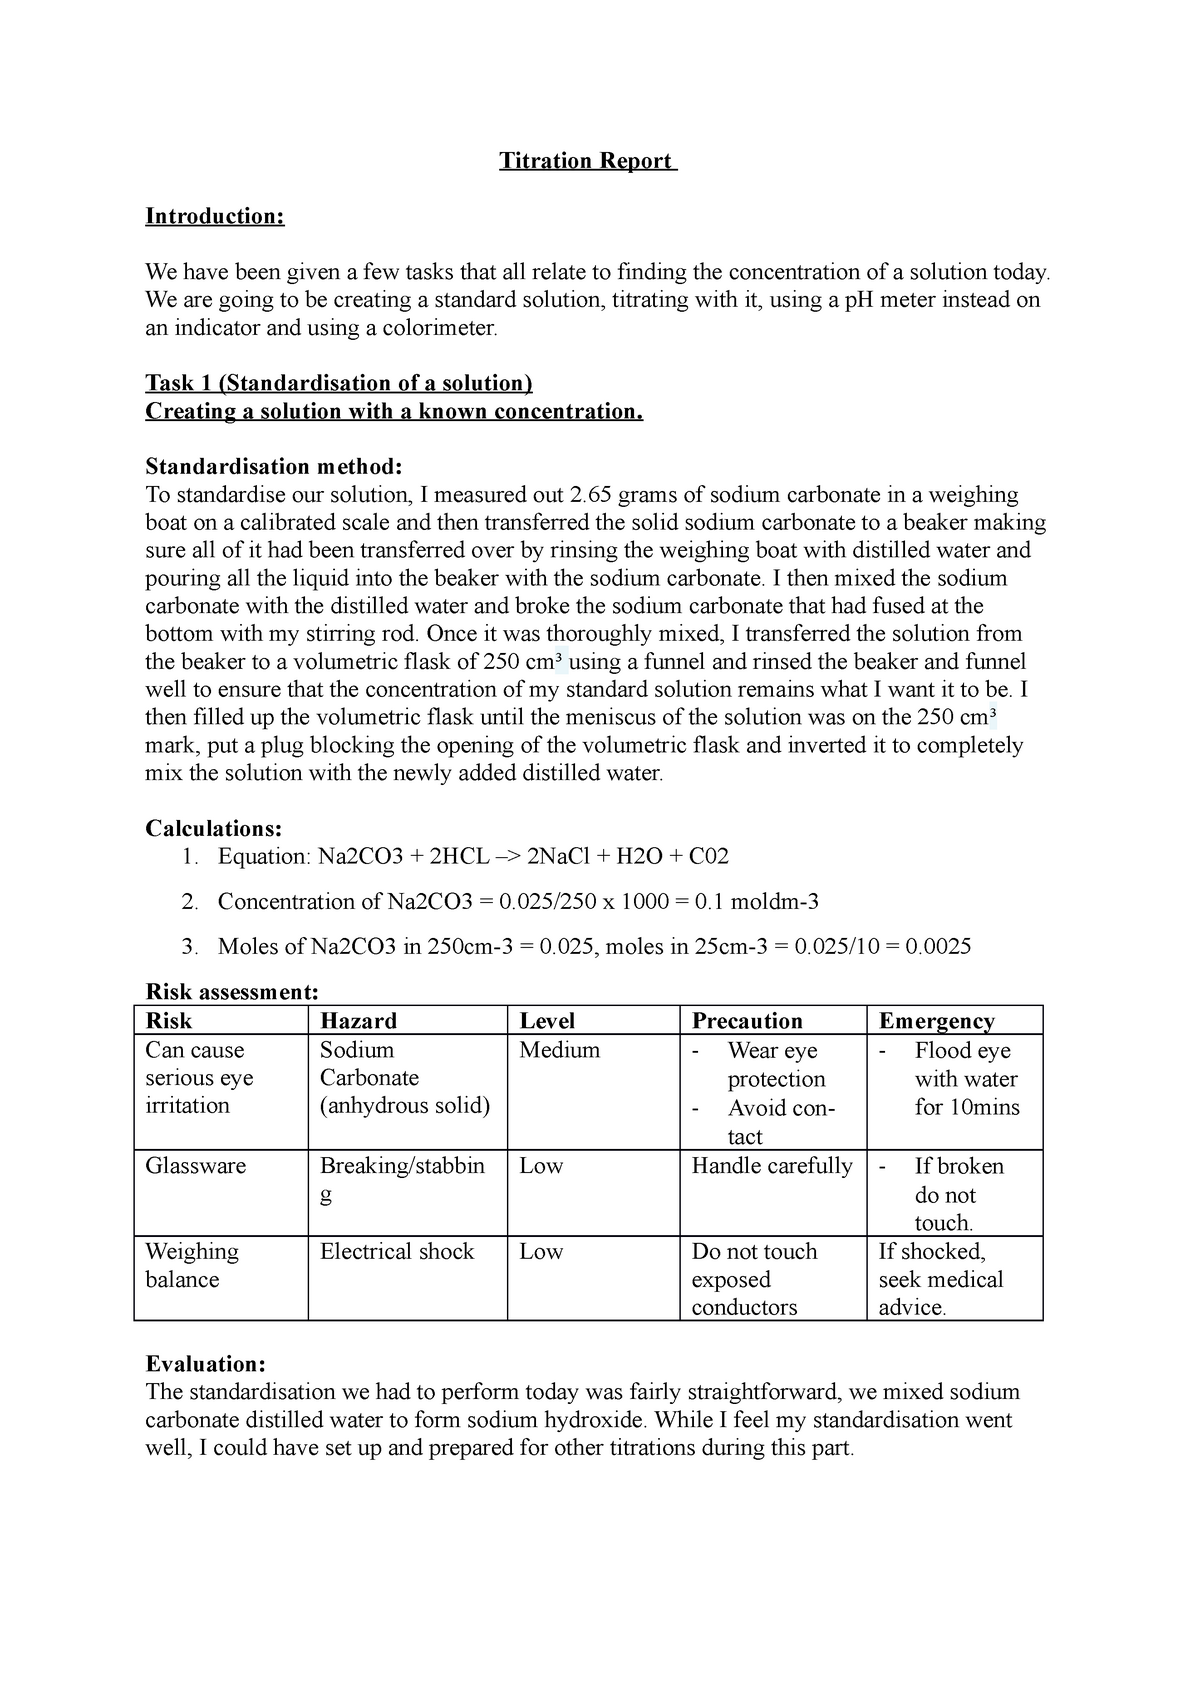 unit 4 assignment 2 applied science